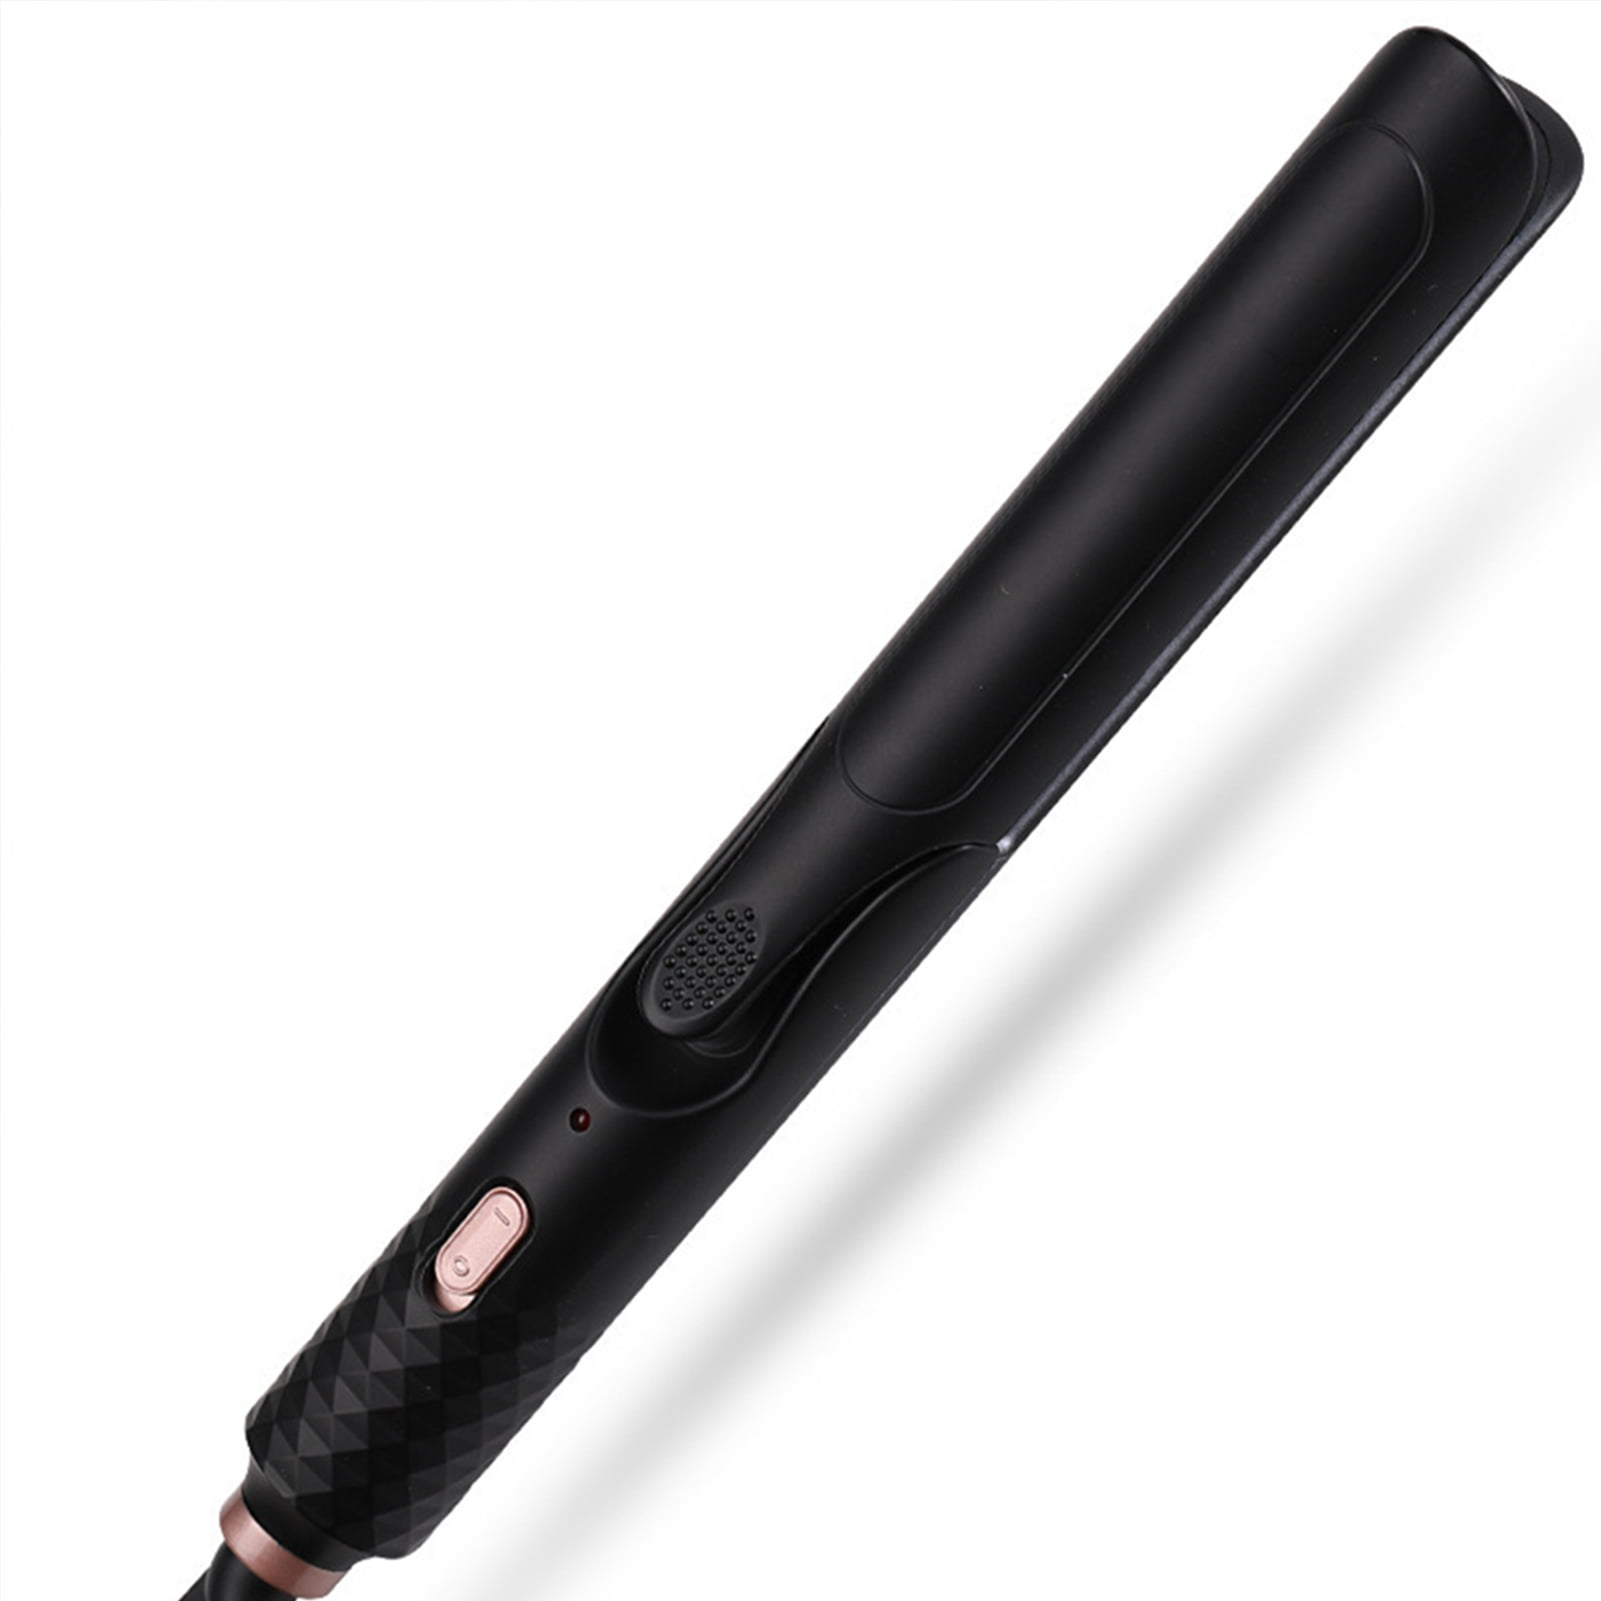 1/2" Suproot Professional 2-in-1 Hair Straightener Curling Iron $7.87 + Free Shipping w/ Walmart+ or on $35+